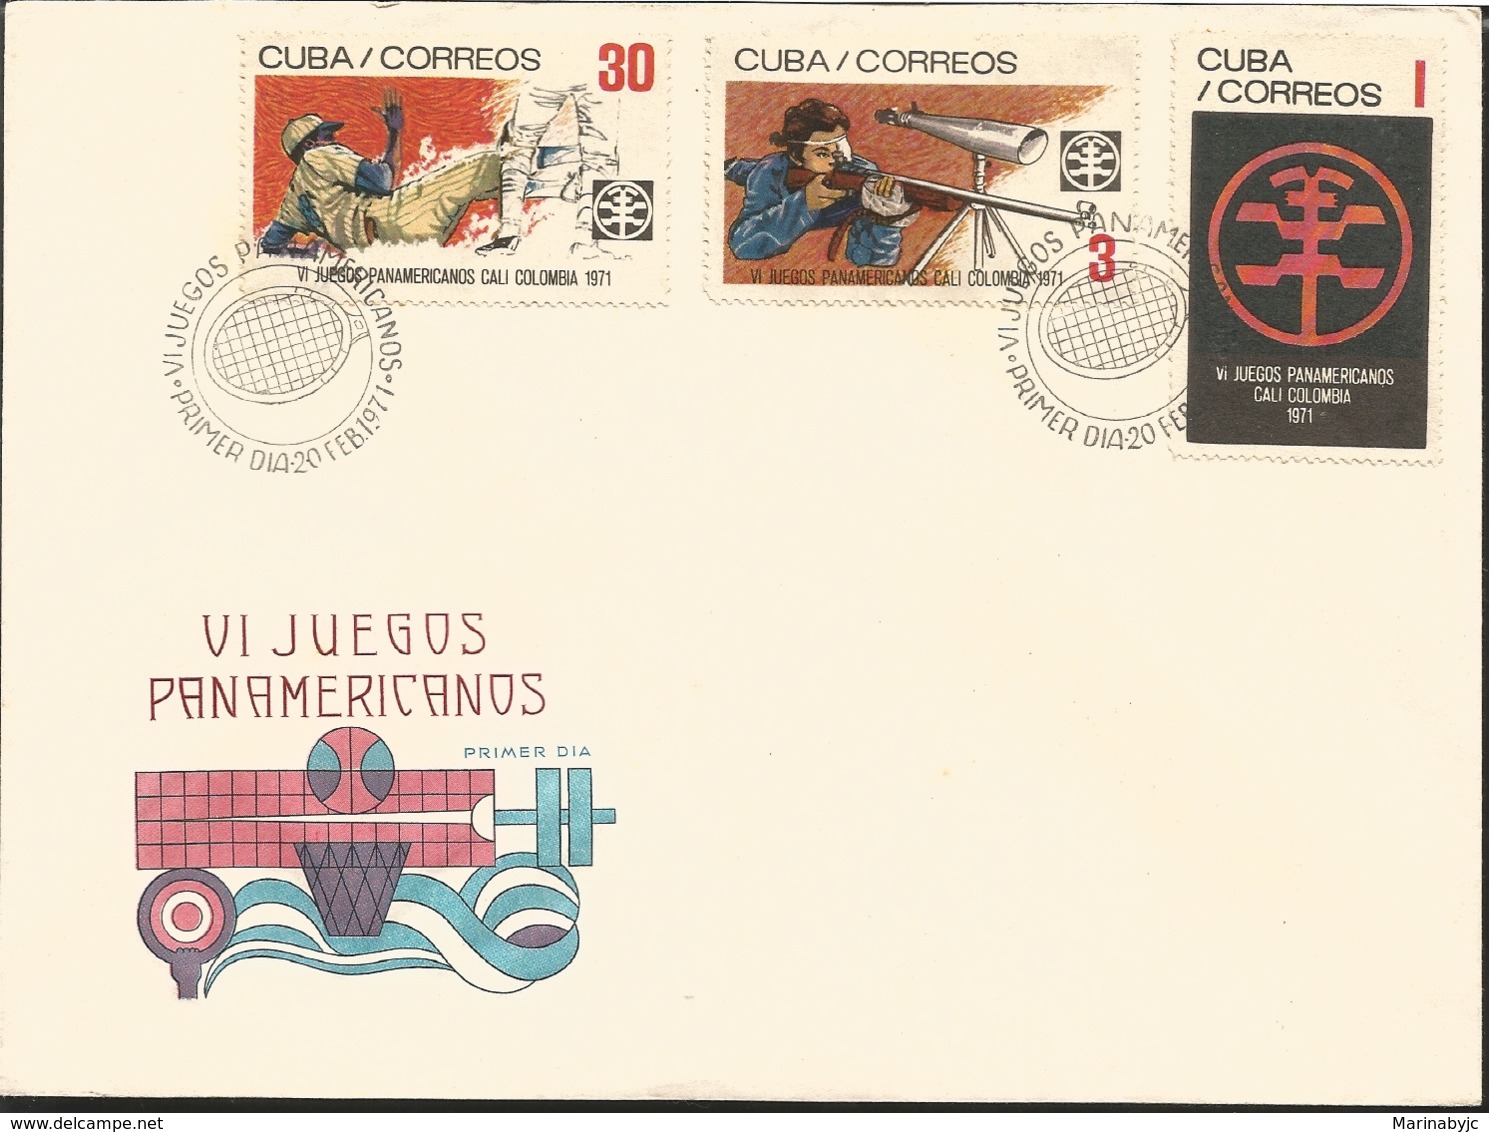 V) 1971 CARIBBEAN, 6TH PAN AMERICAN GAMES, CALI, COLOMBIA, BASEBALL, RIFLE SHOOTING, EMBLEM, WITH SLOGAN CANCELATION IN - Storia Postale